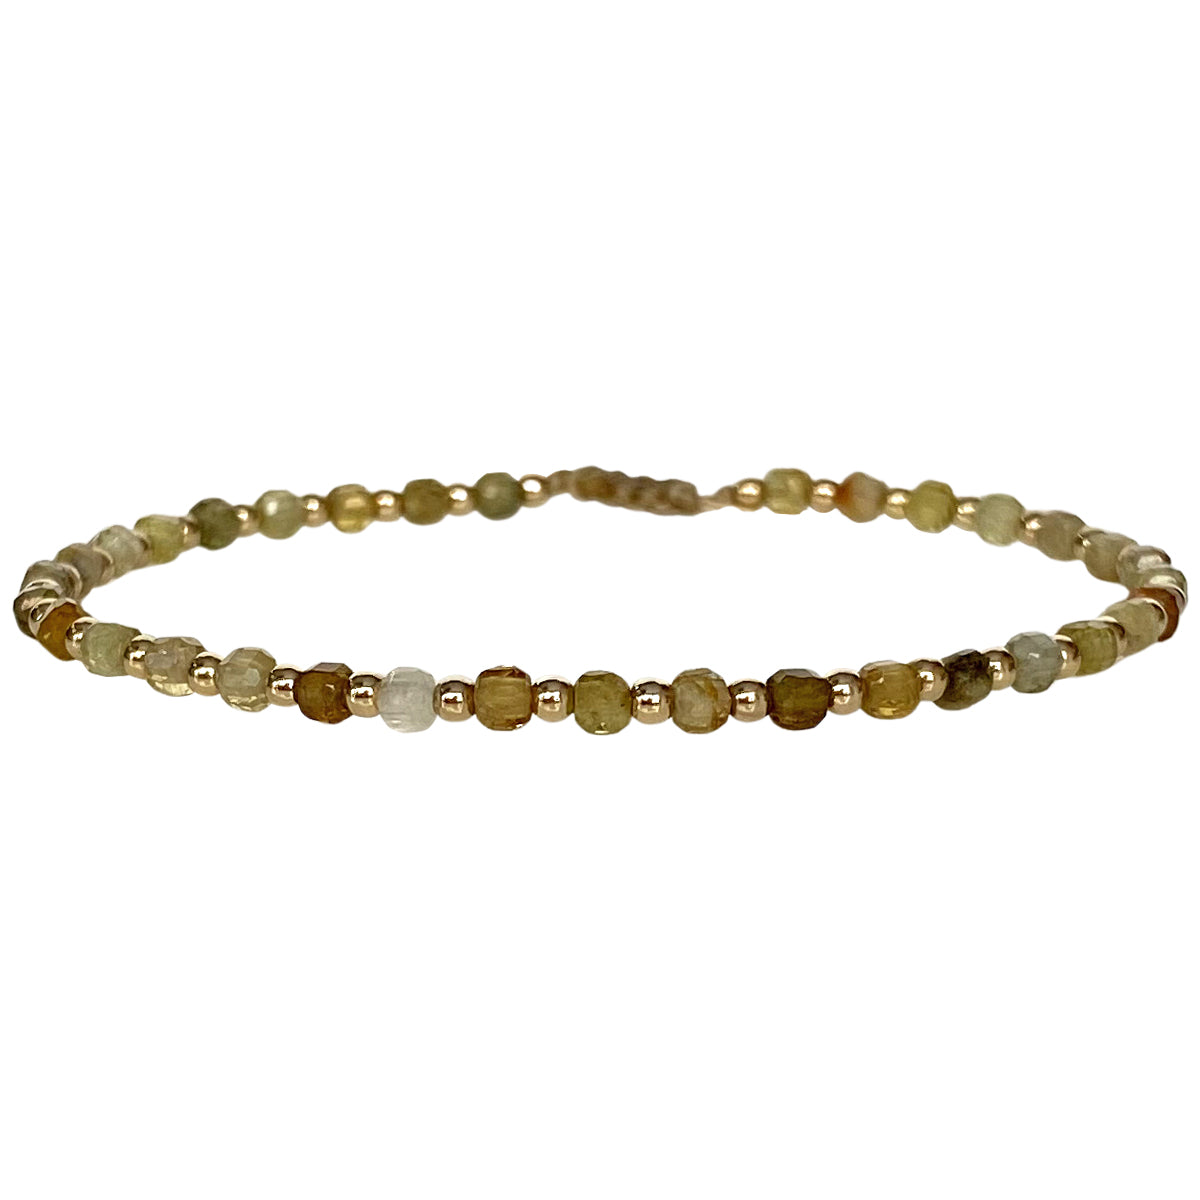 This delicate jewel is handmade using gold filled beads and Tsavorite semi-precious stones. This beauty will be one of your favorite bracelets as you can wear it with any accessories or outfits. Give to your looks a touch of elegance and sparkle !  Details:  - Tsavorite semi-precious stones   - 14 K gold filled beads  -Adjustable bracelet  -width: 2m  -Can be worn in the water